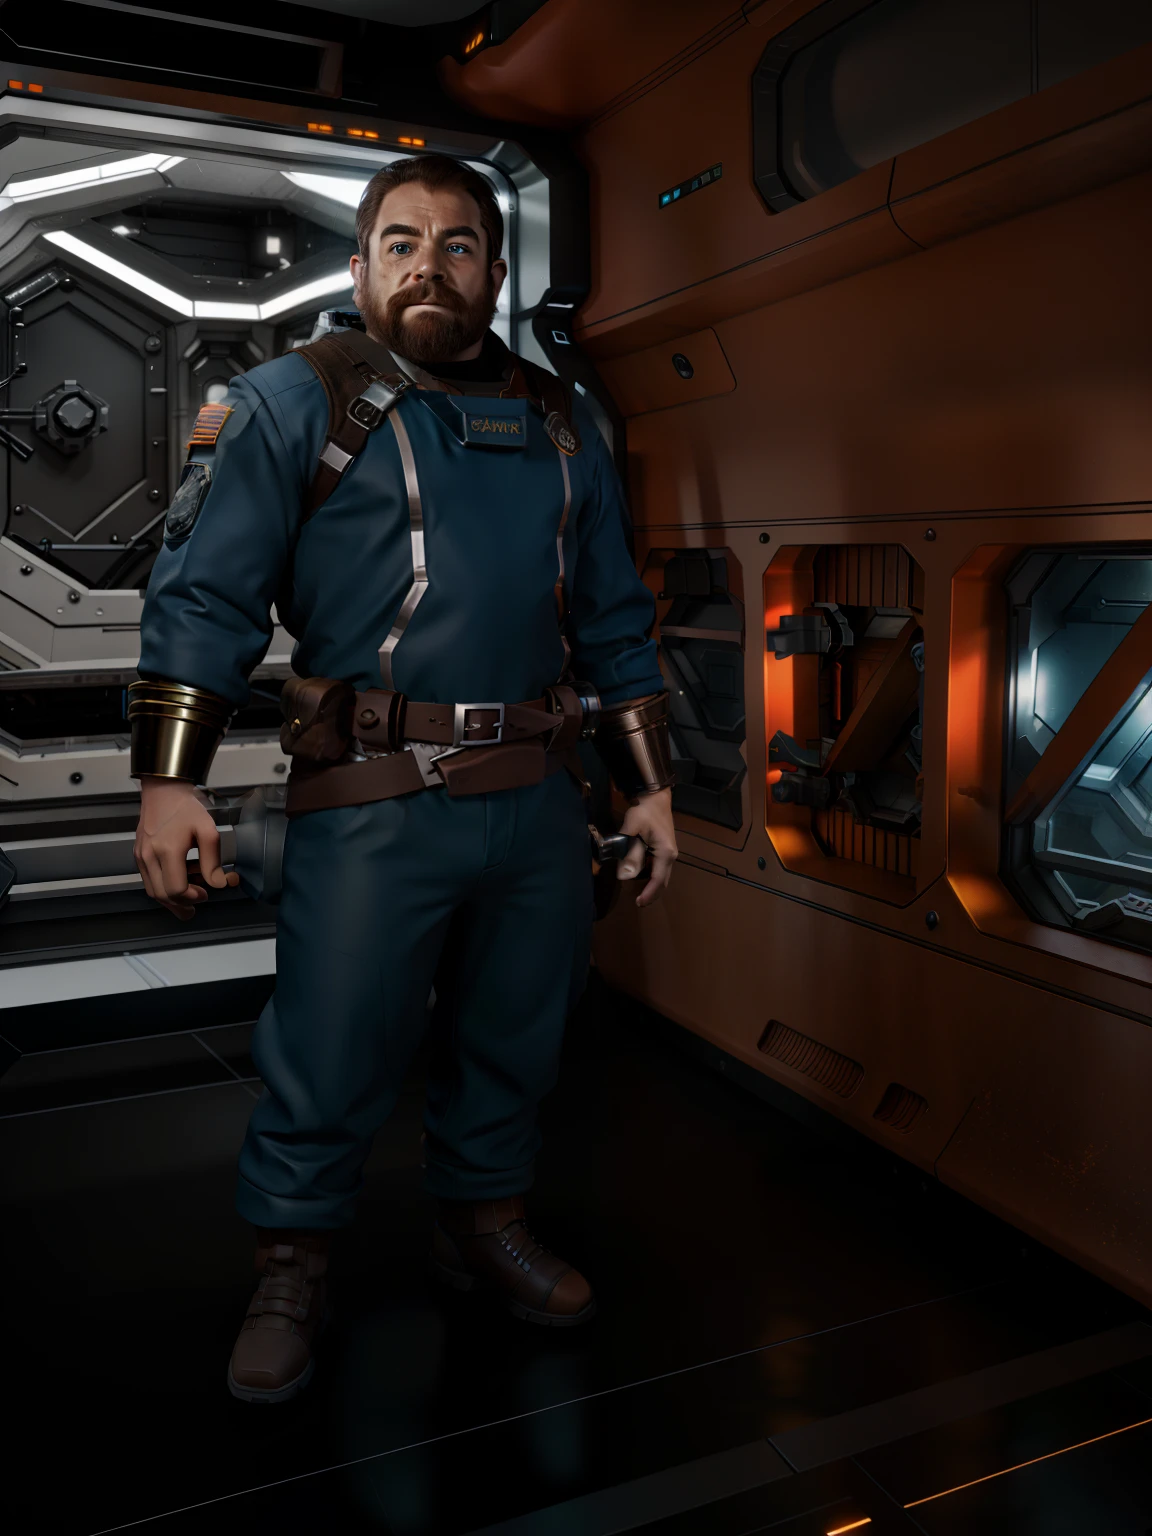 Dwarf male engineer, dwarf officer, 3d render, 3d character, scifi character, engineering space, starship, space station, broad squat man, brown hair man, engineer uniform